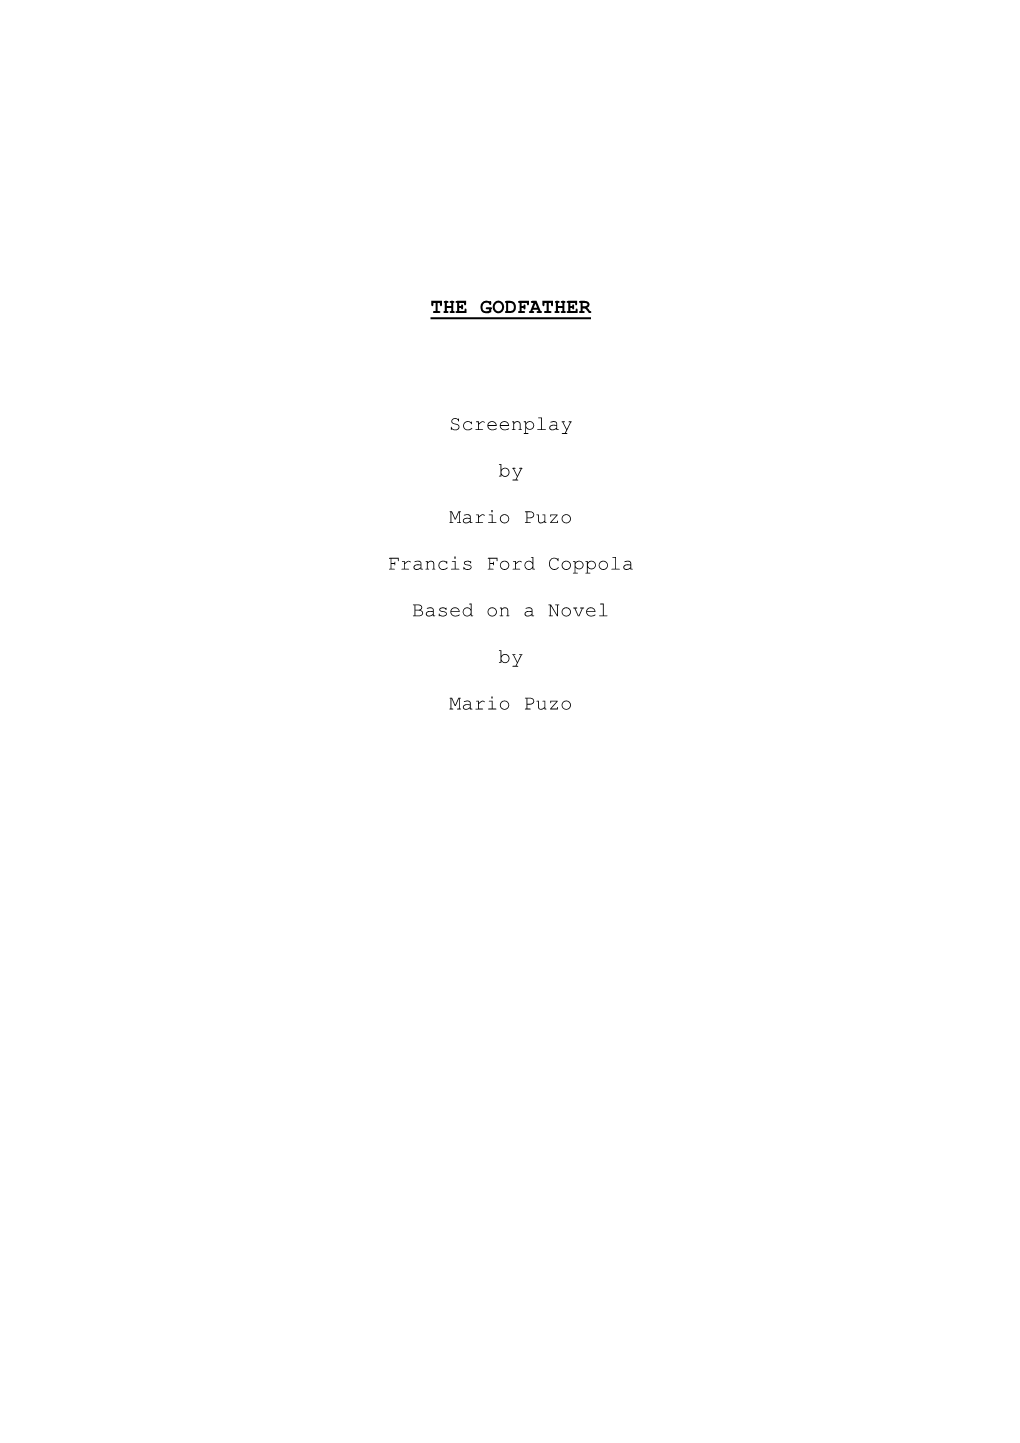 The Godfather (1972) Screenplay by Francis Ford Coppola